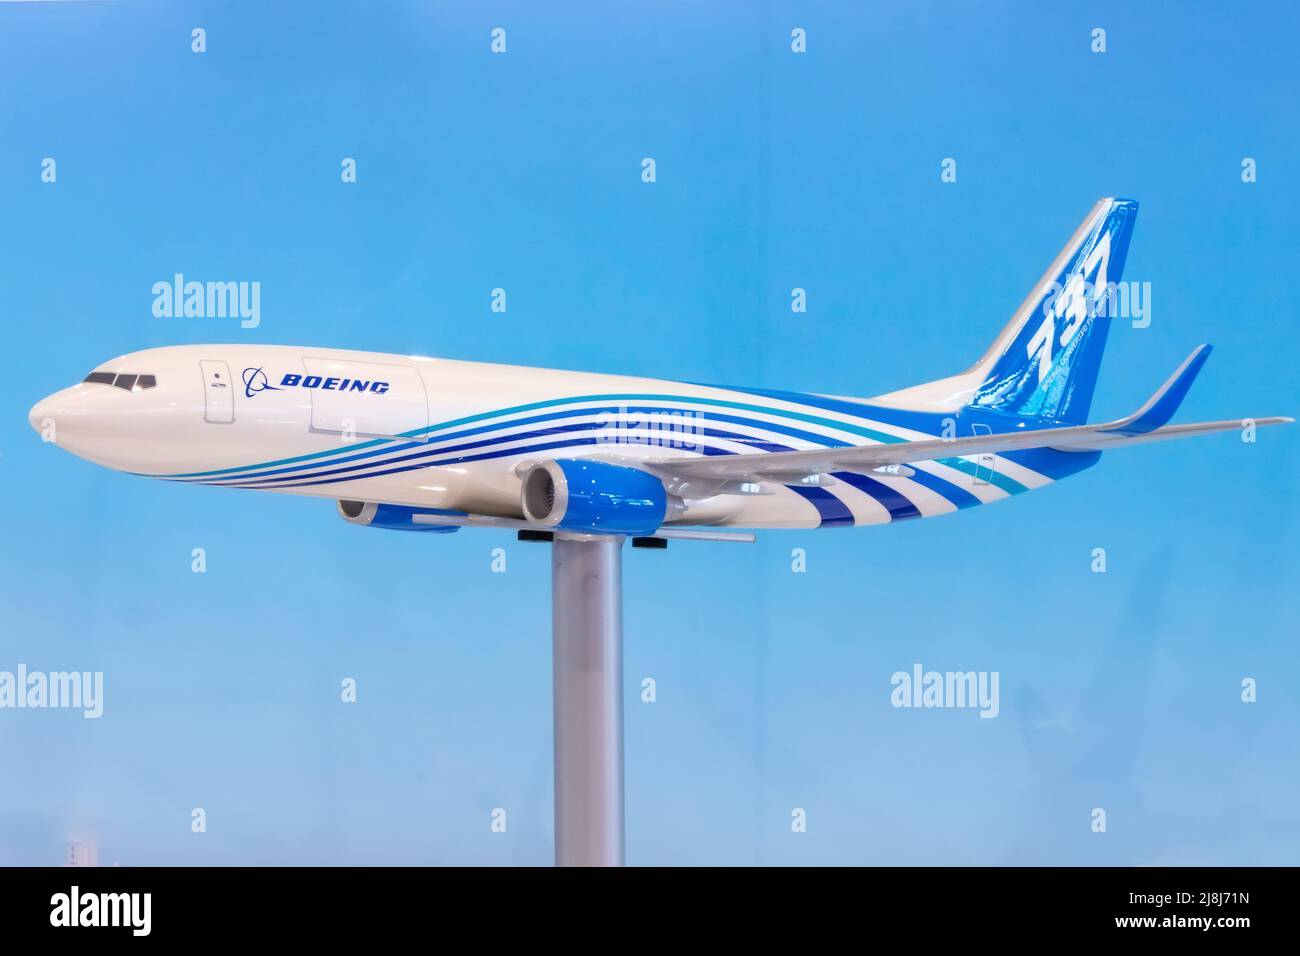 Exhibition models boeing aircraft 737 max. Russia. Moscow. 22 July 2021 Stock Photo